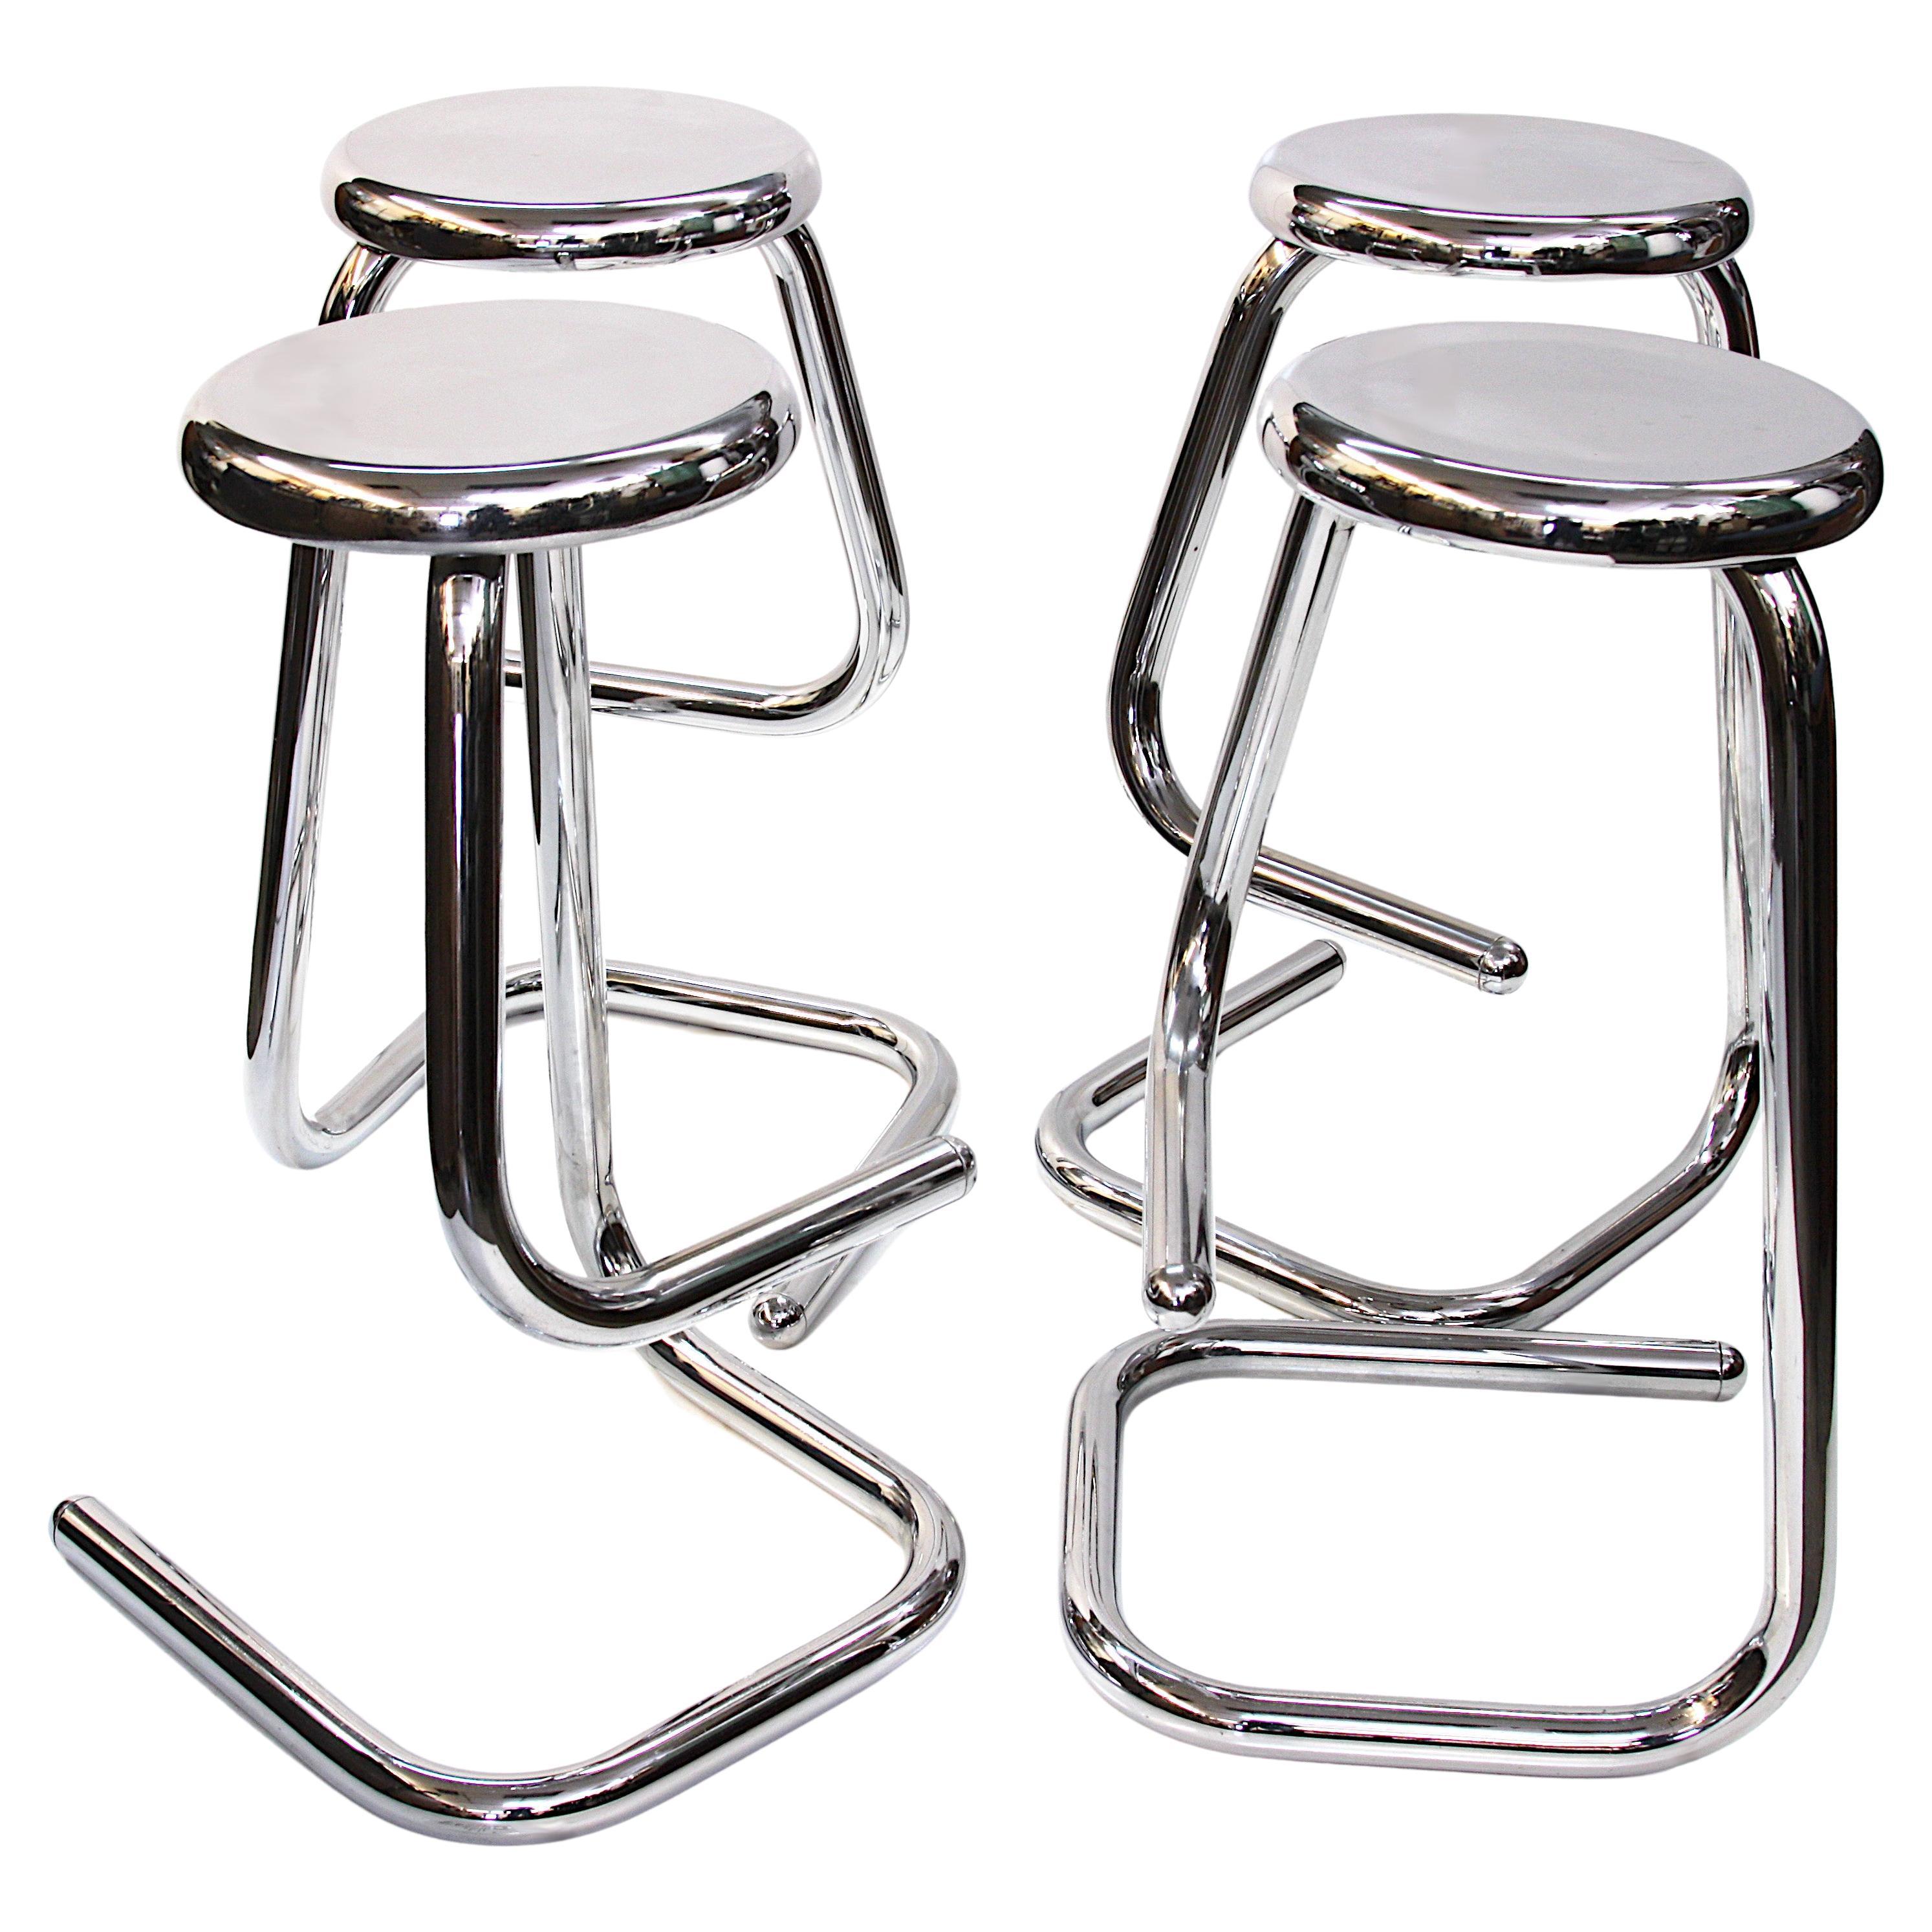 Set of Four Mid-Century Modern Chrome K700 Paperclip Bar Stools by Kinetics